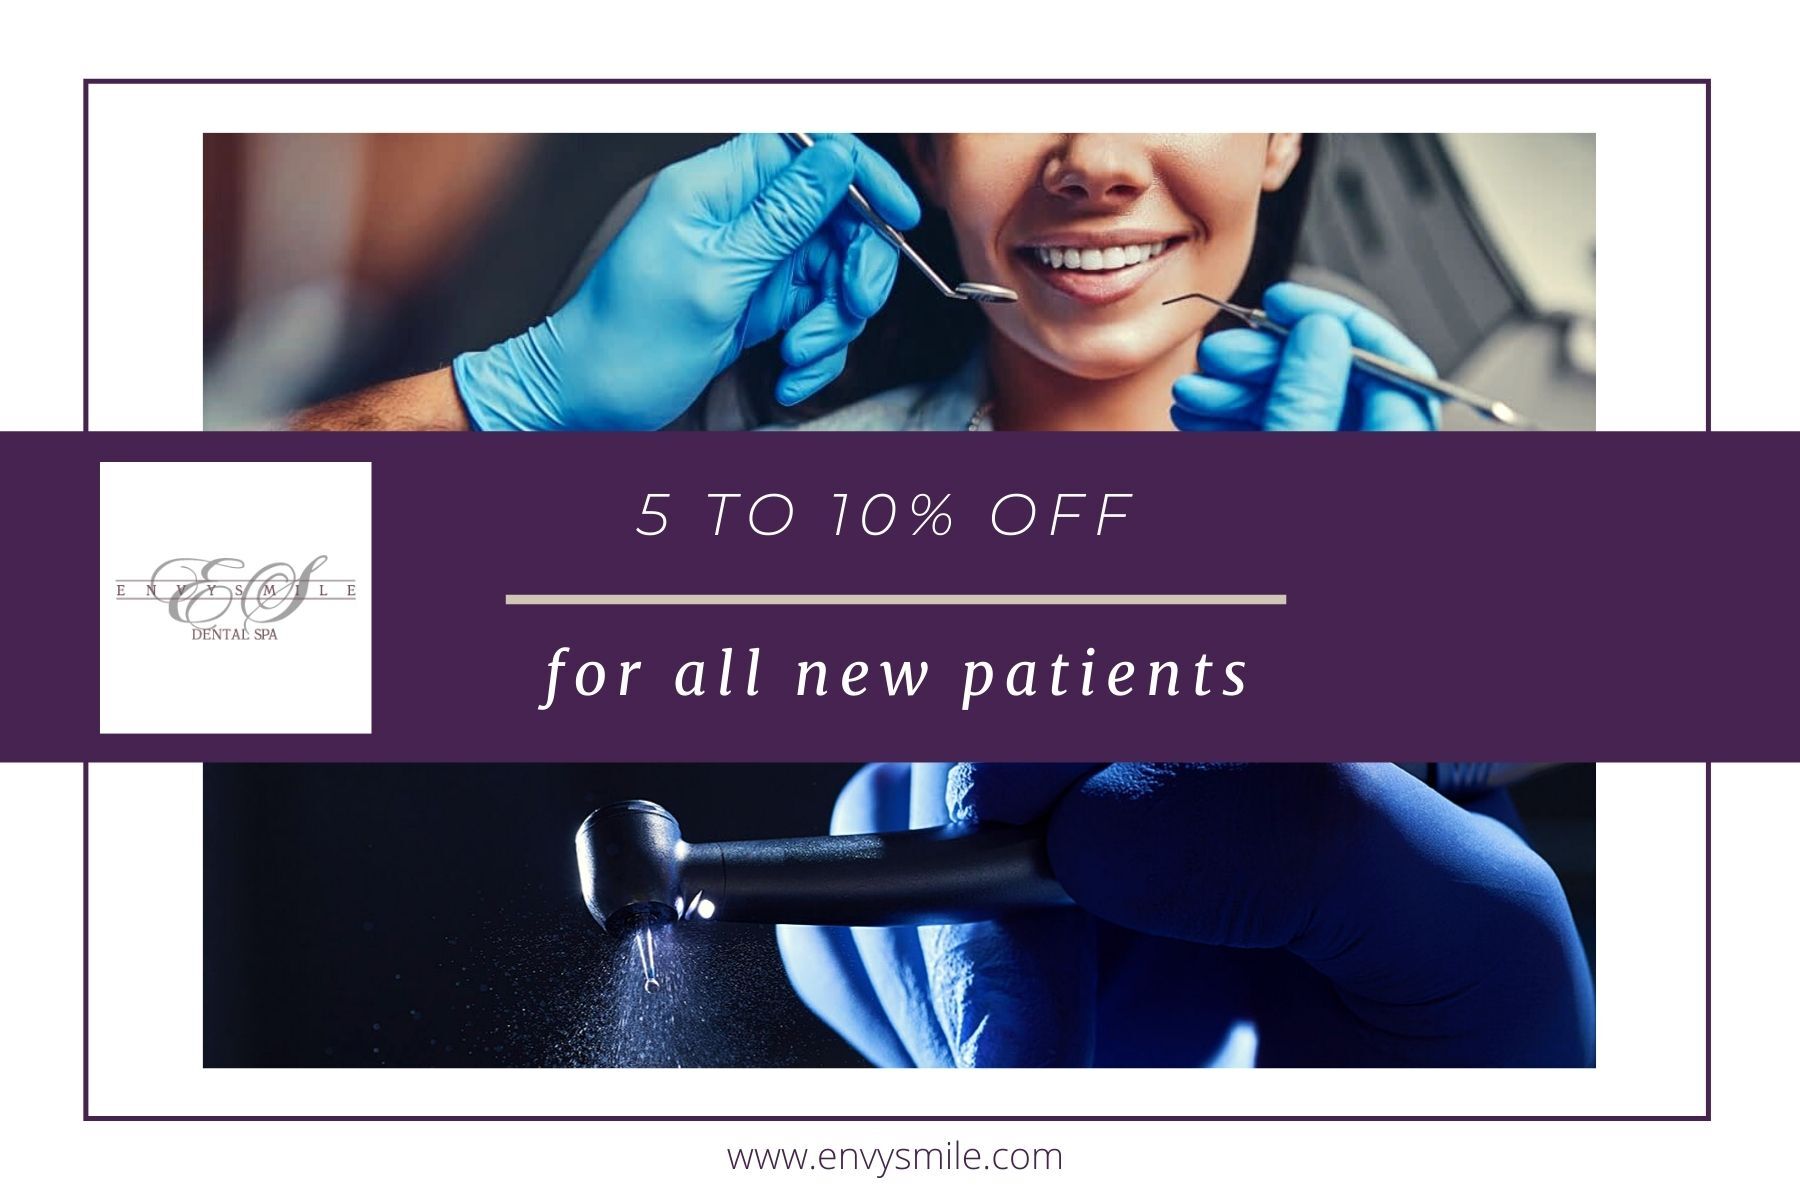 Envy Smile Dental Spa offers a discount, Online Event